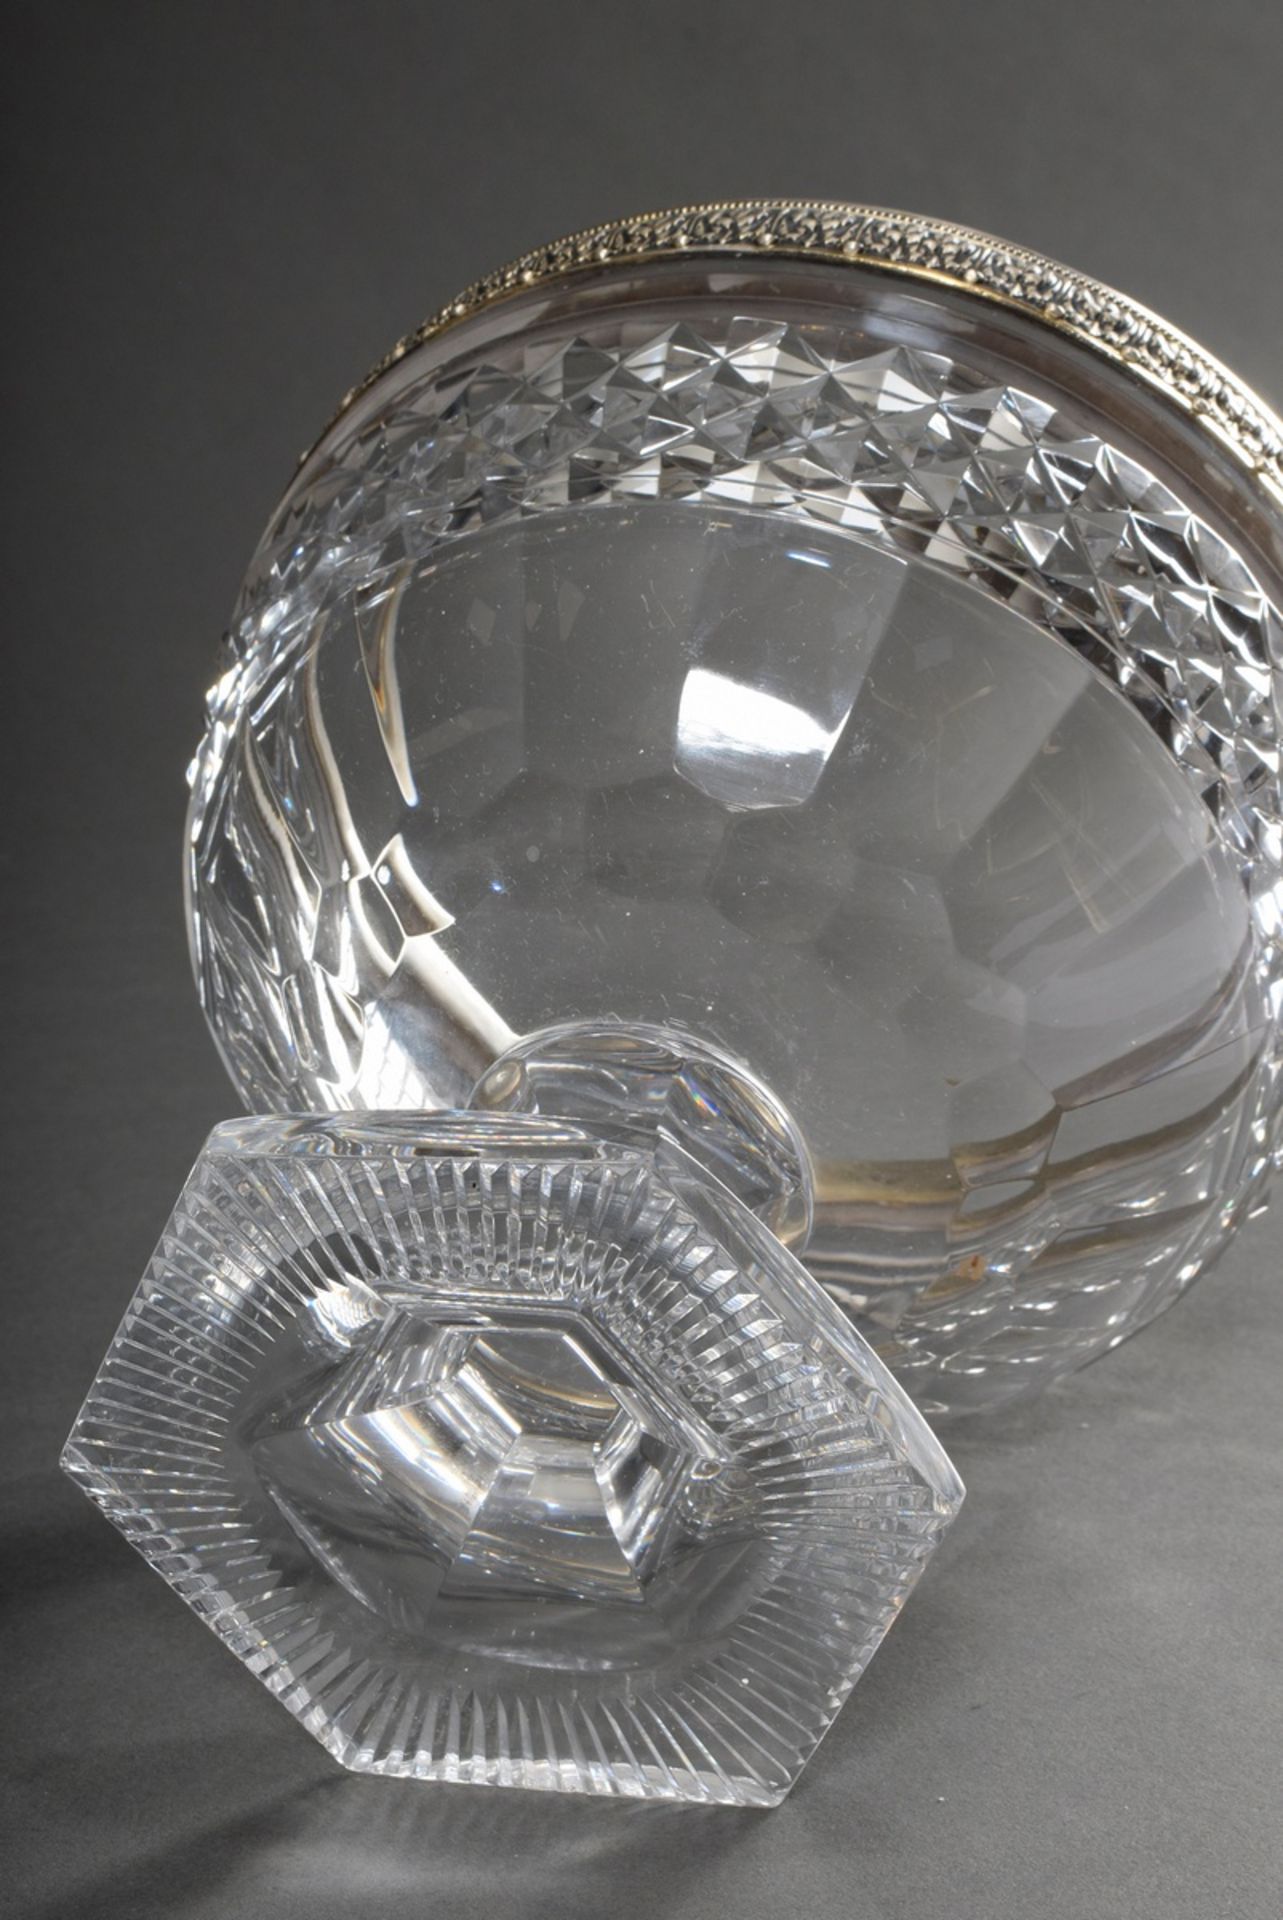 Cut crystal top bowl with gilded silver 800 leaf frieze rim and date engraving, Adolf Mogler/Heilbr - Image 4 of 4